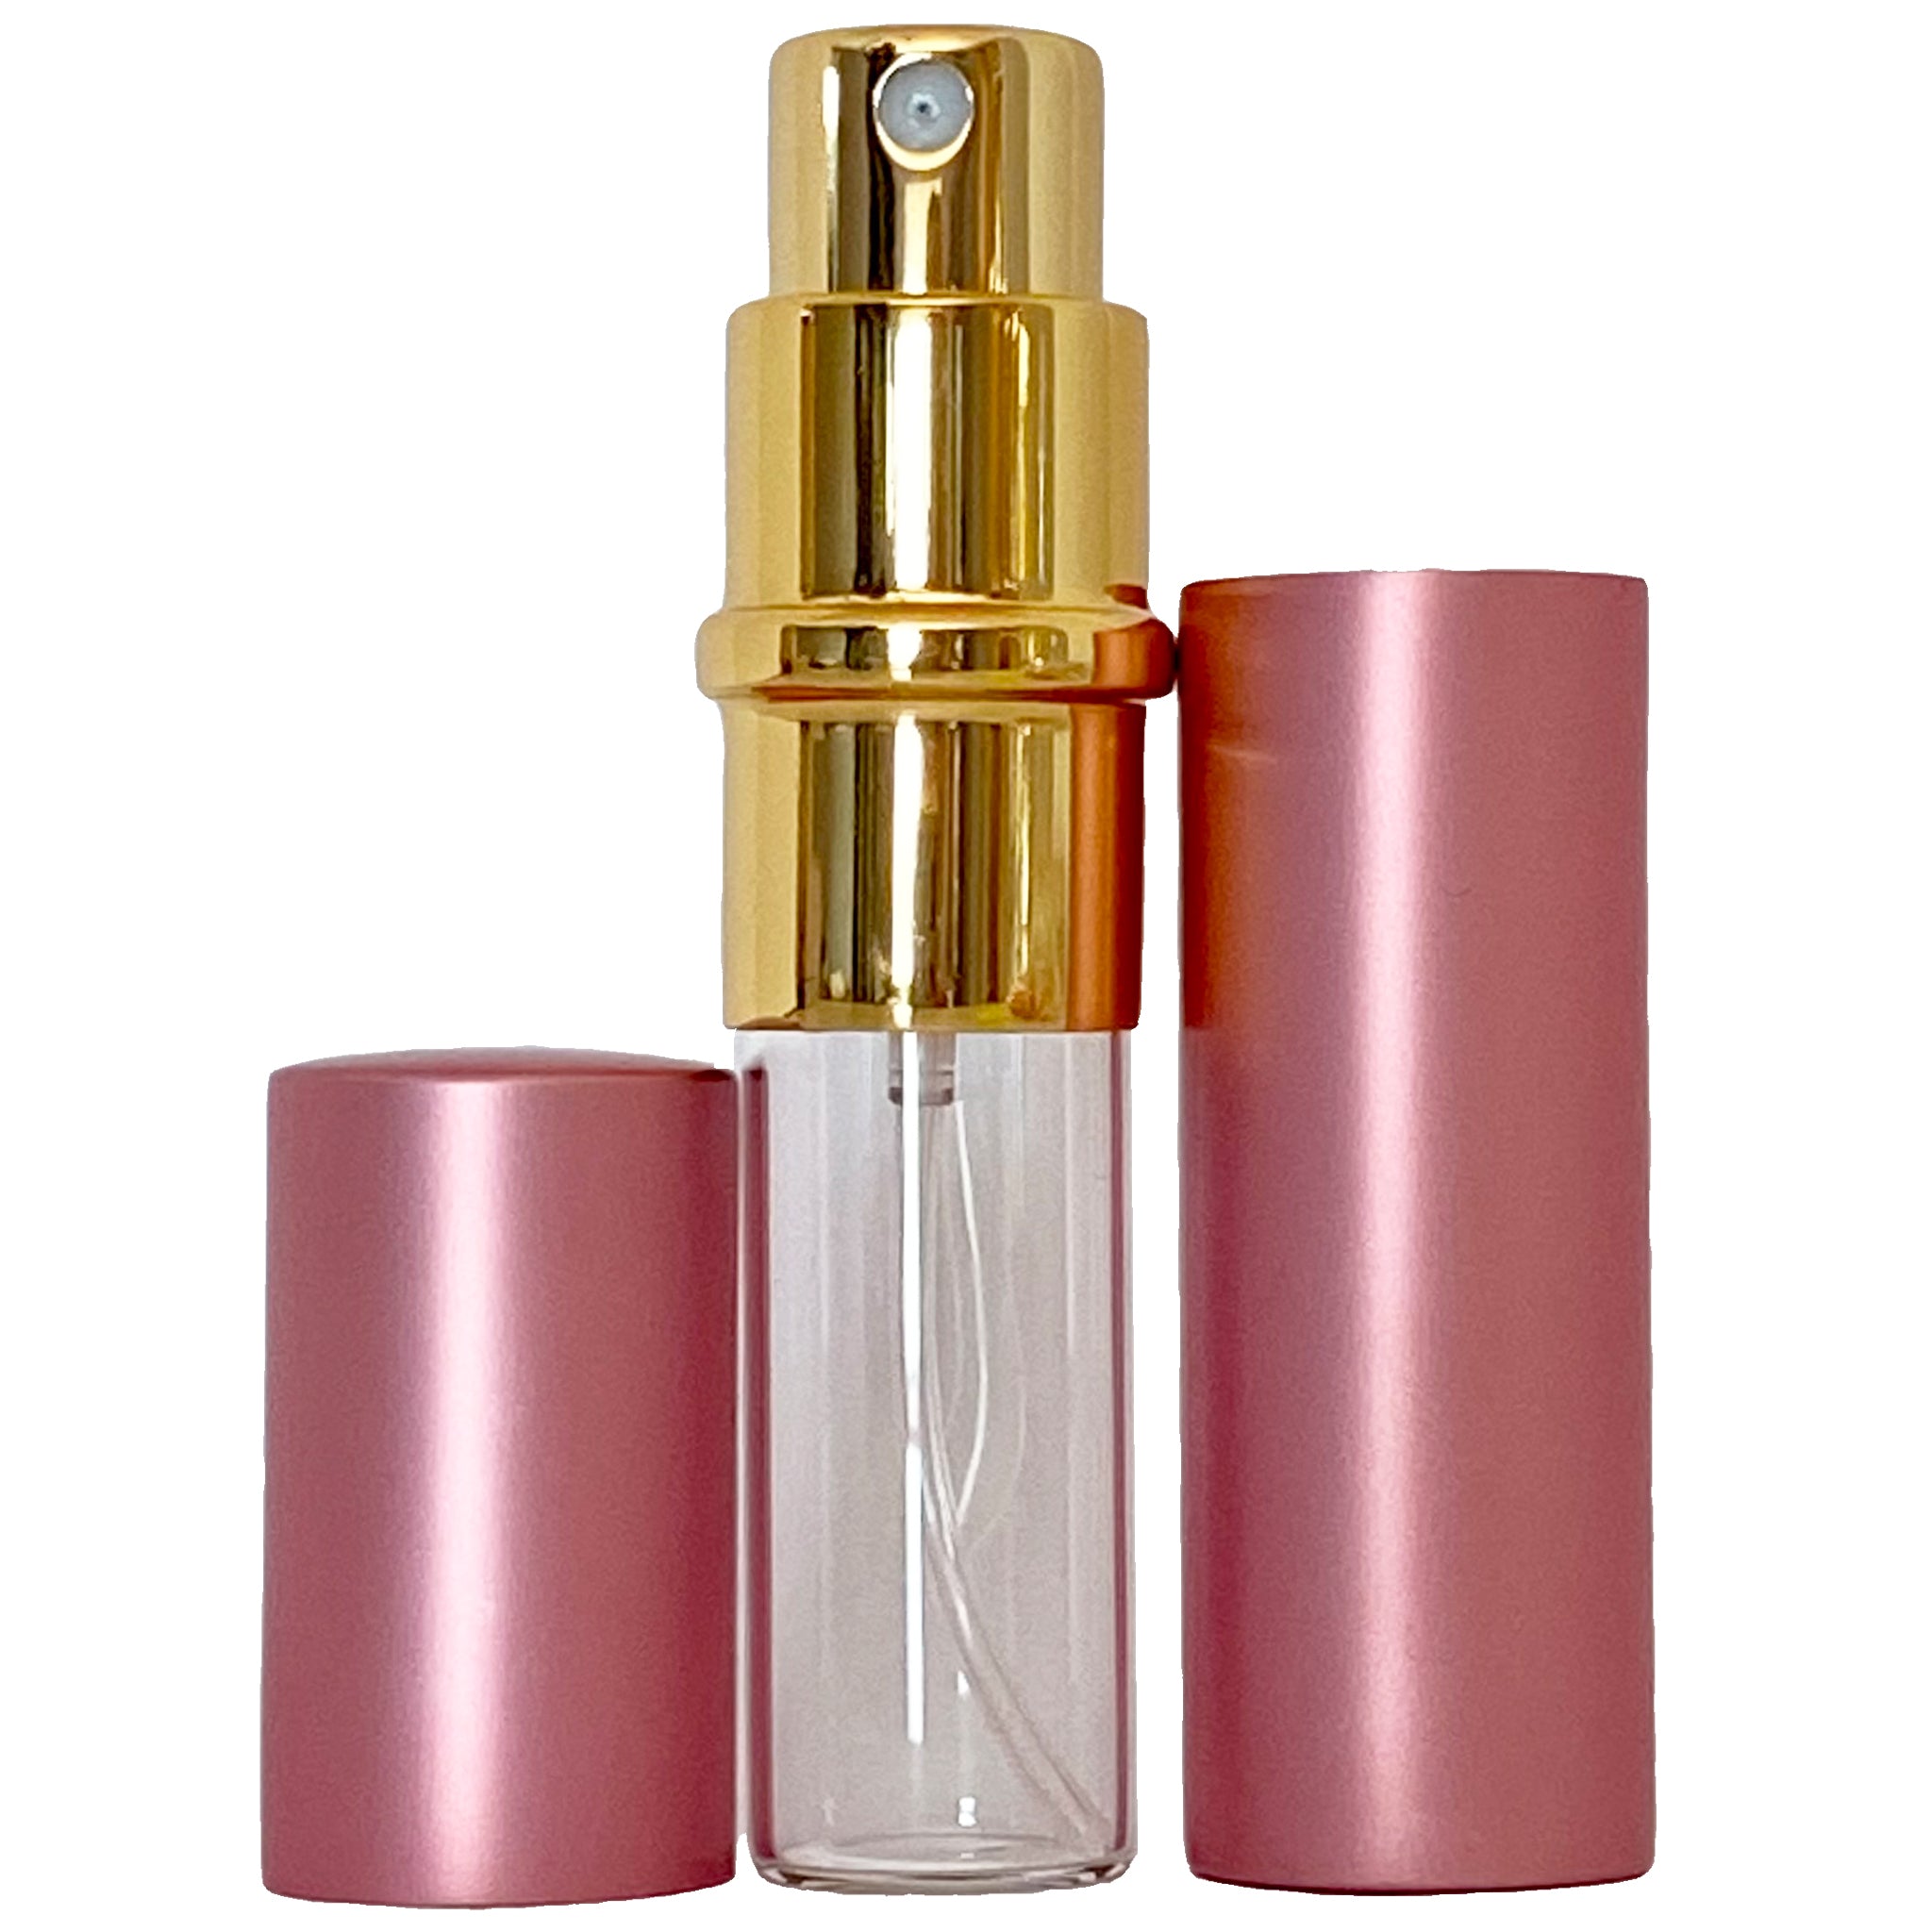 6ml 0.2oz Pink Perfume Glass Spray Deluxe Bottles Gold Atomizers